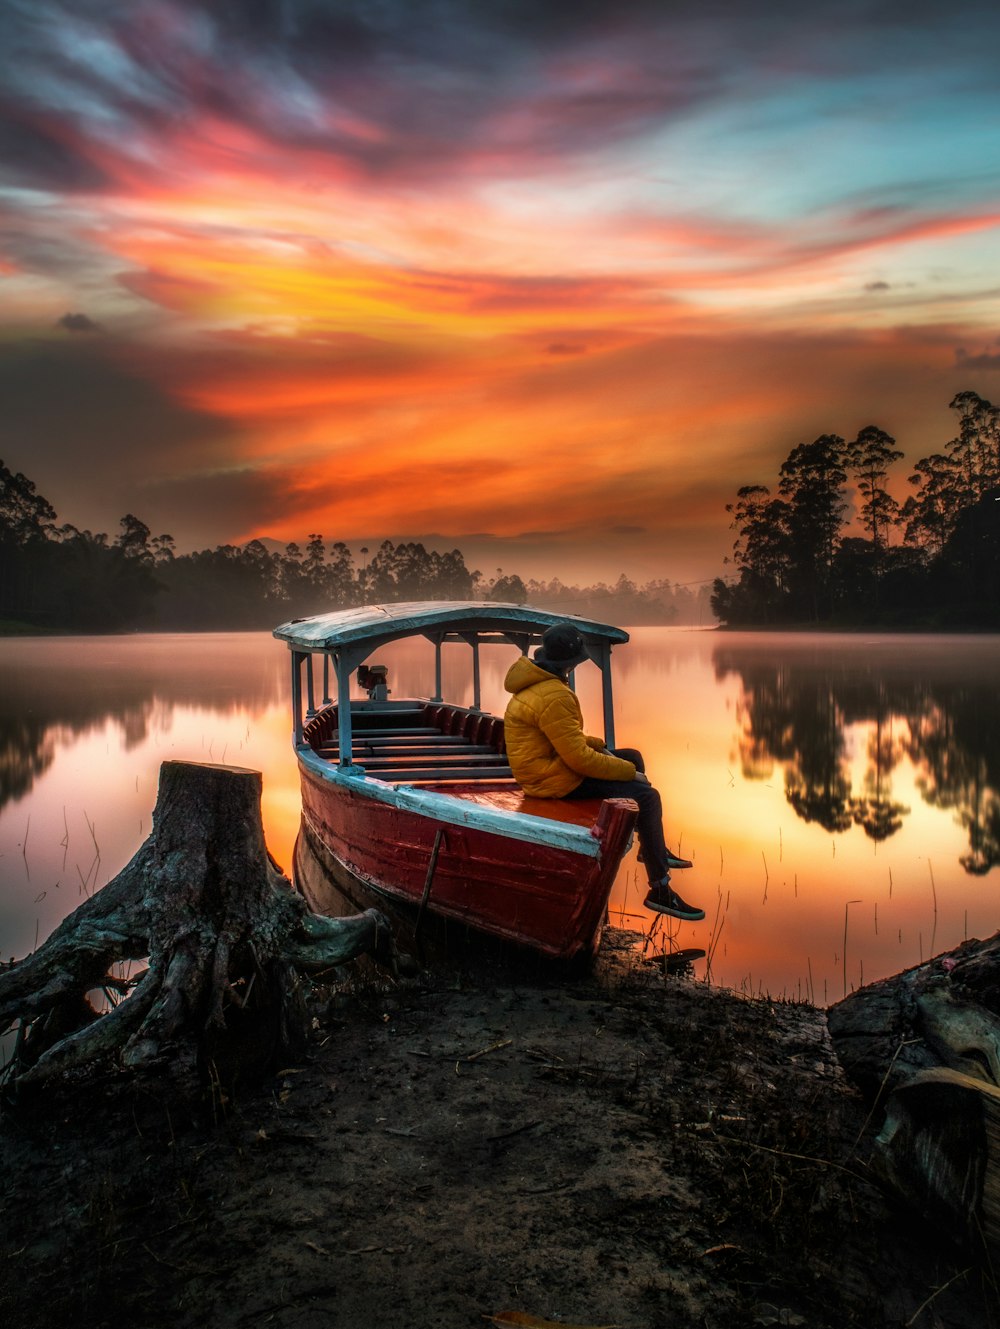 man in red shirt sitting on boat during sunset